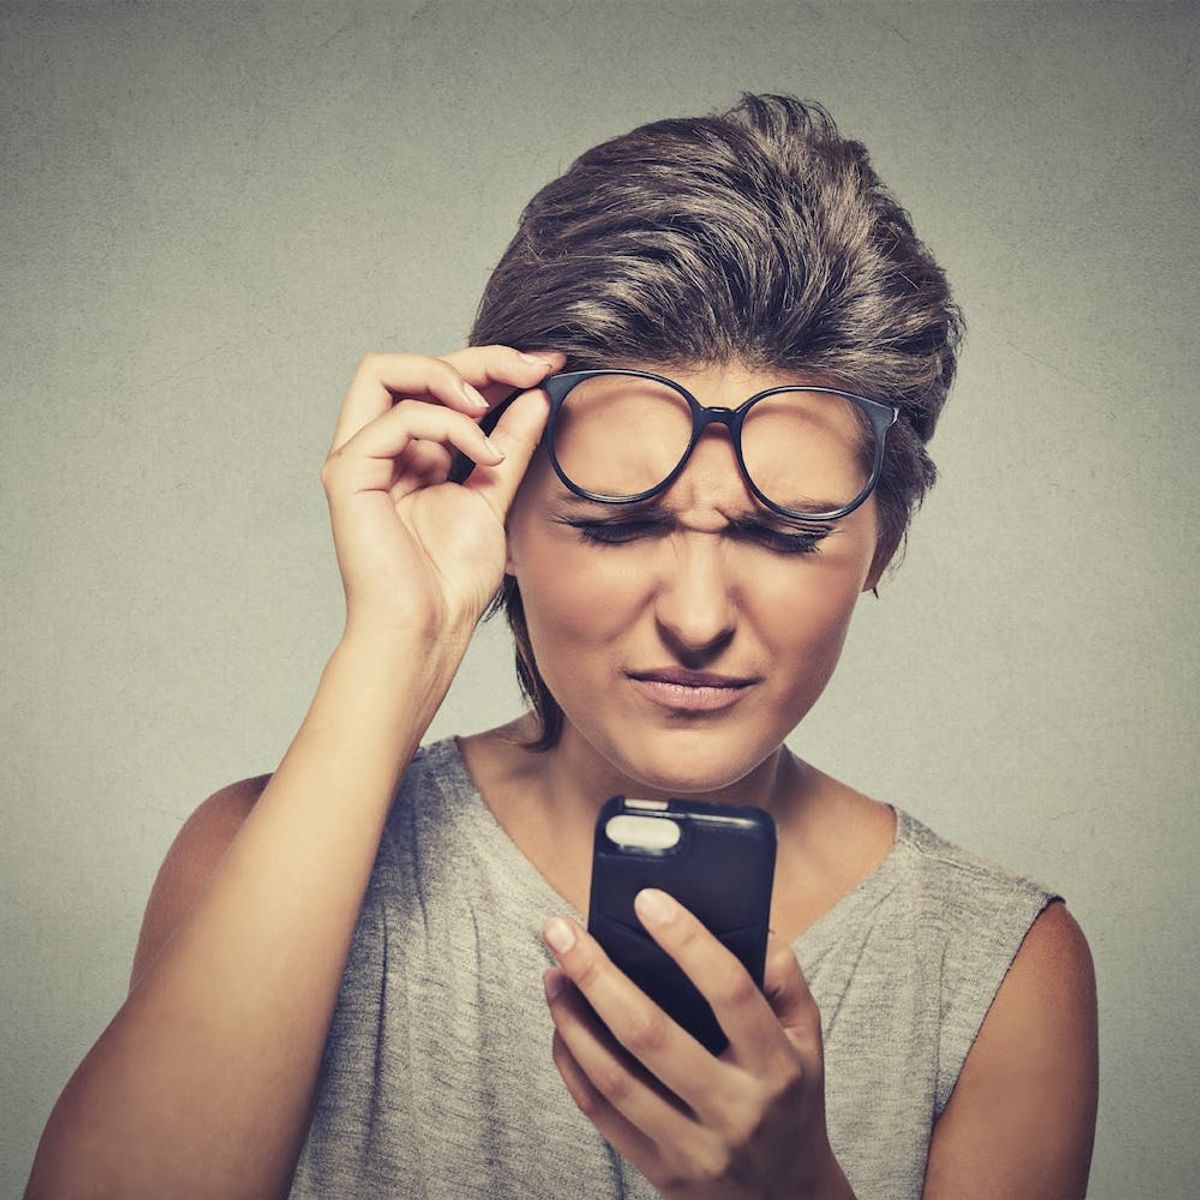 6 Ways to Save Your Eyesight When Using Your iPhone